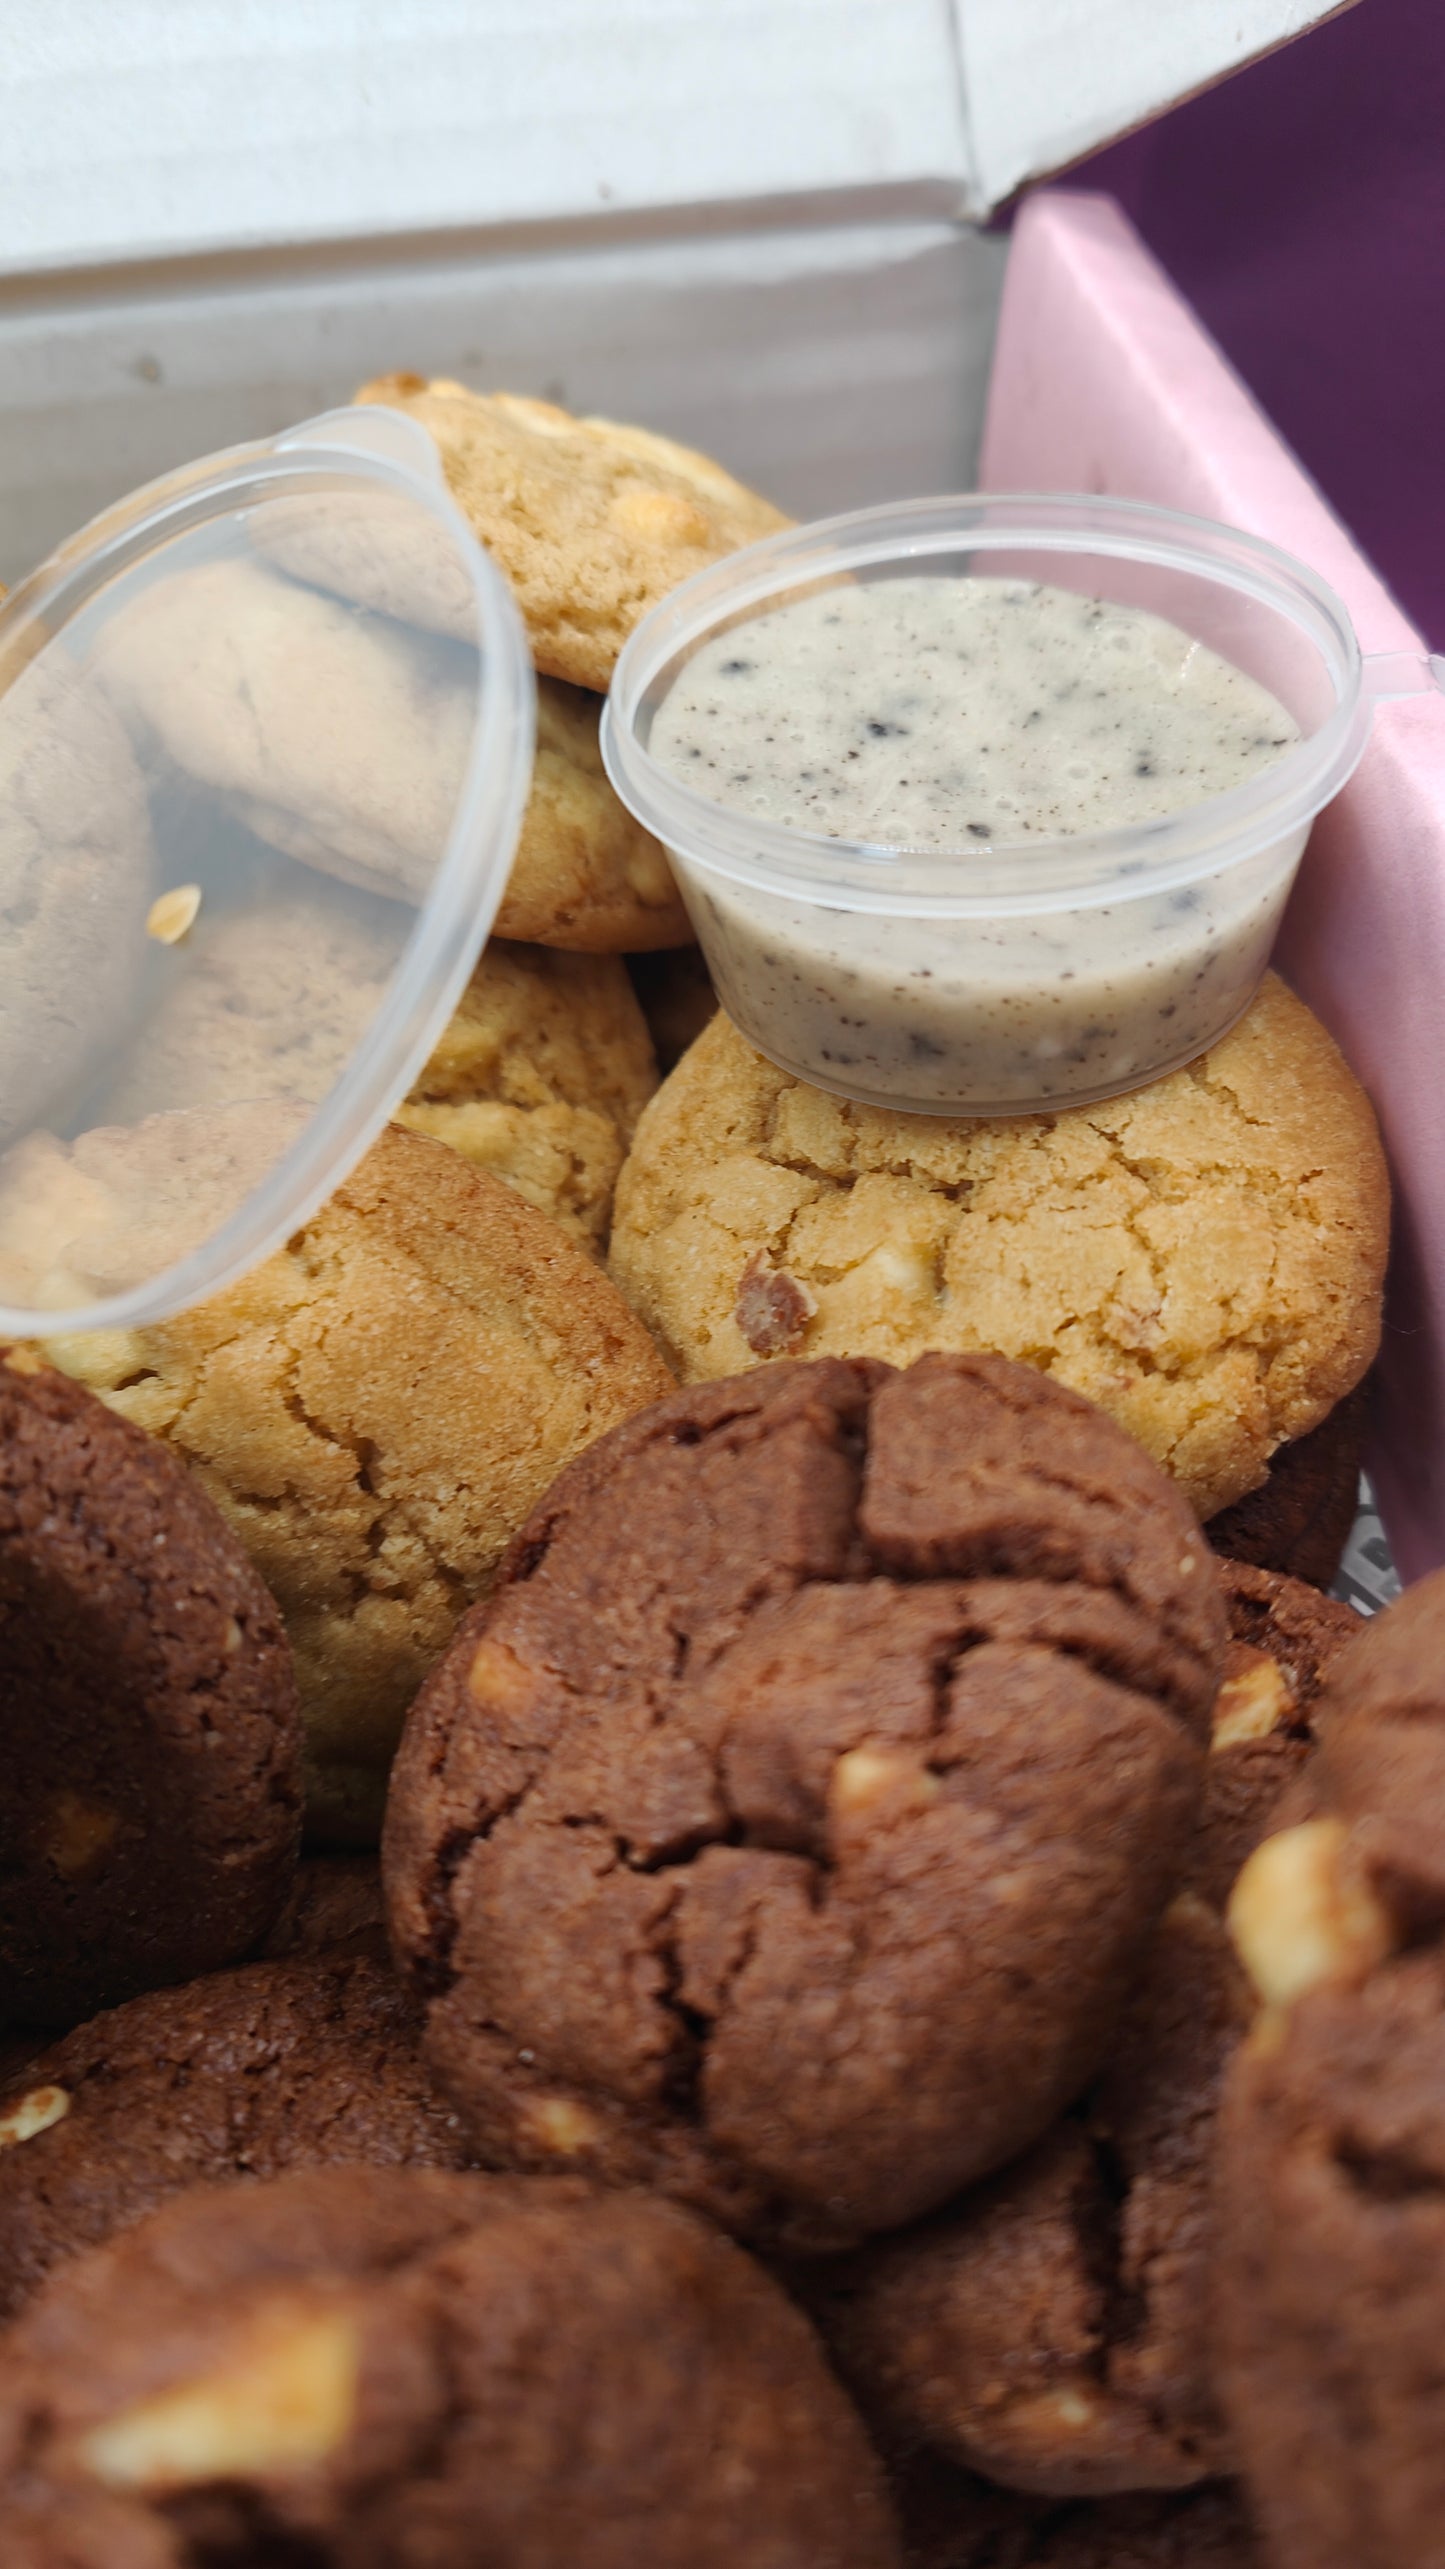 40 Cookie 4 Flavour Share Dipping Box + 3 Dips